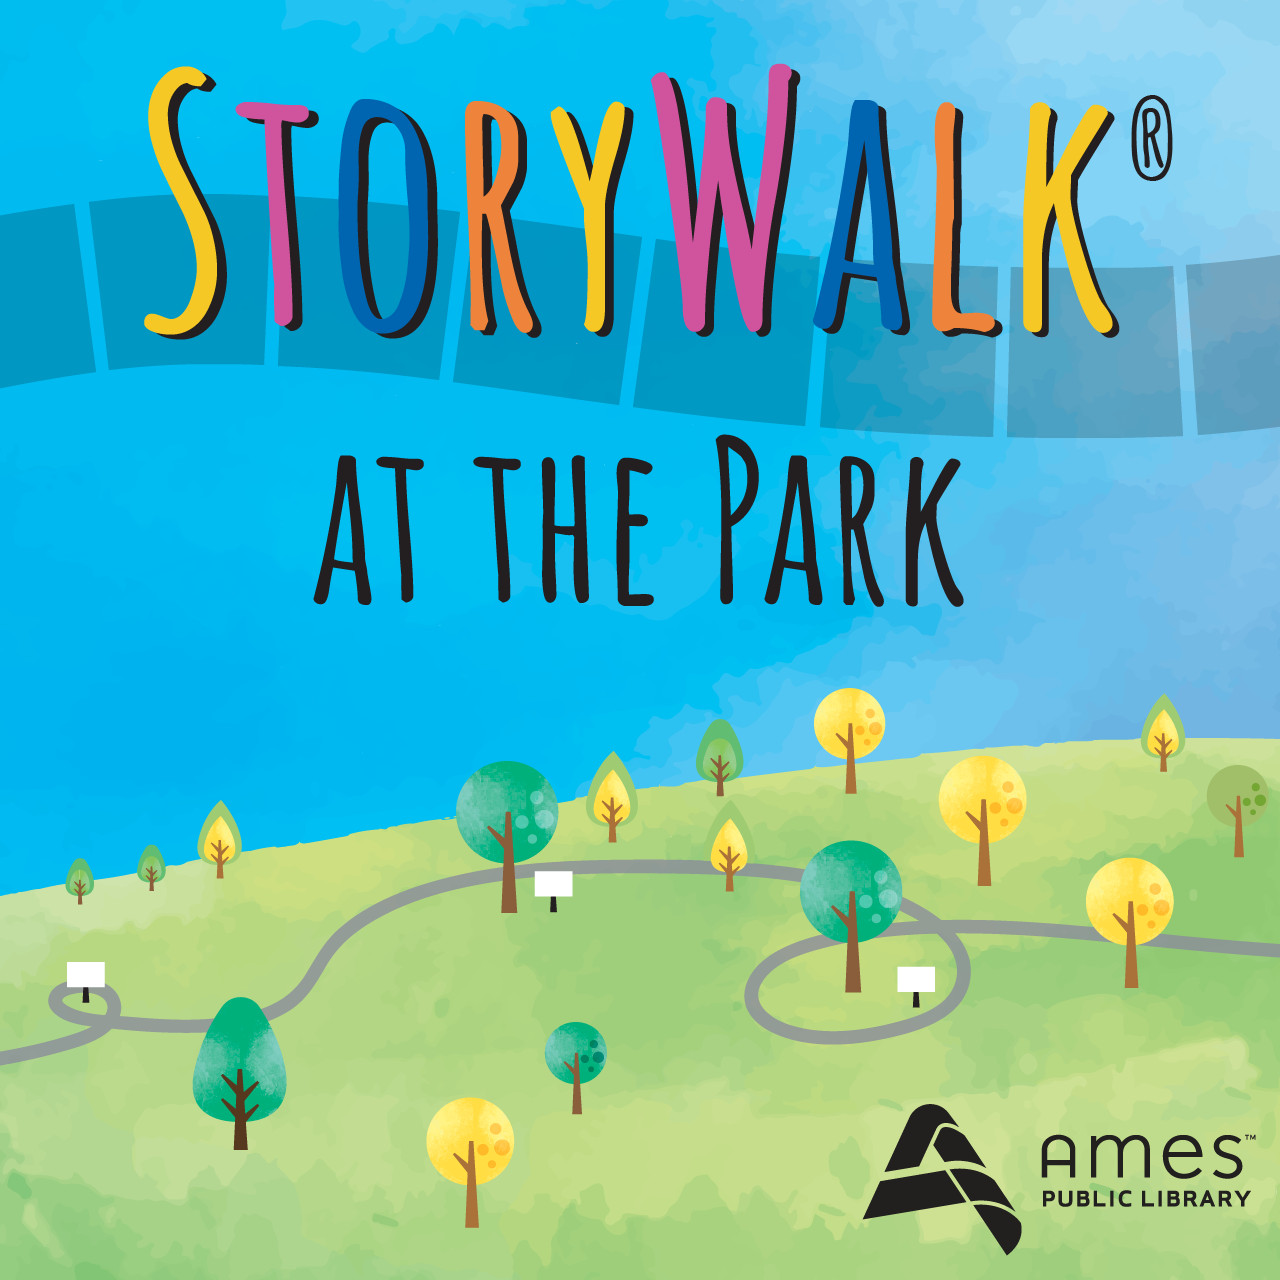 StoryWalk® colorful text on gray sidewalk blocks over graphic of green park with trees